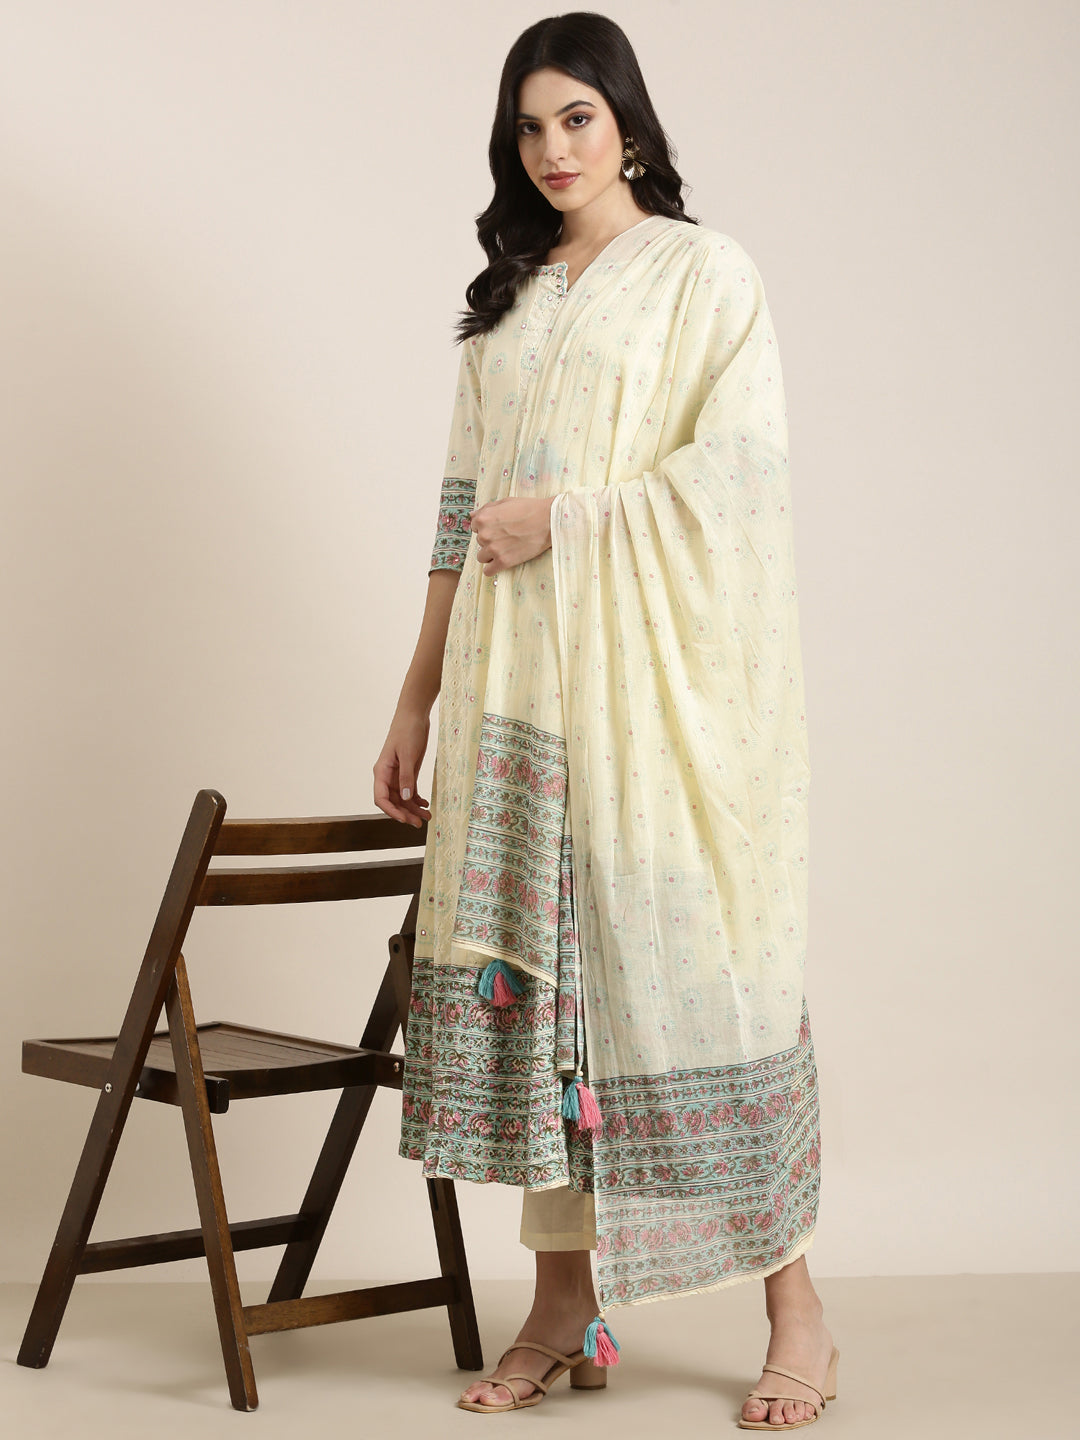 Women Anarkali Cream Floral Kurta and Trousers Set Comes With Dupatta